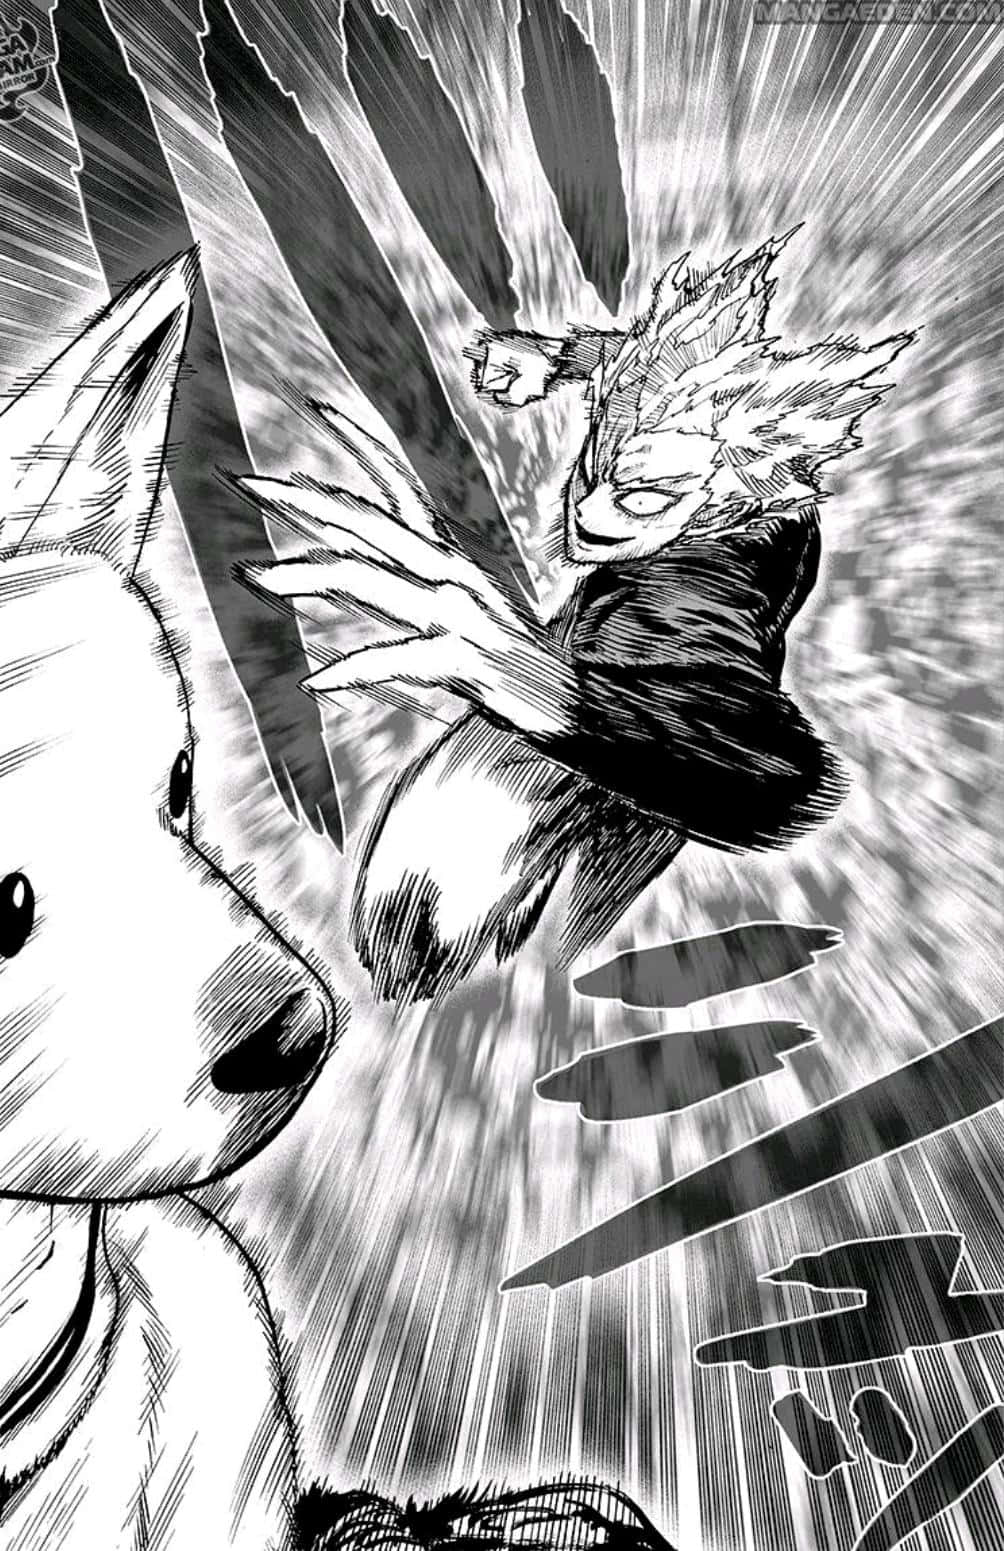 Watch as the story unfolds in this intense Manga Panel